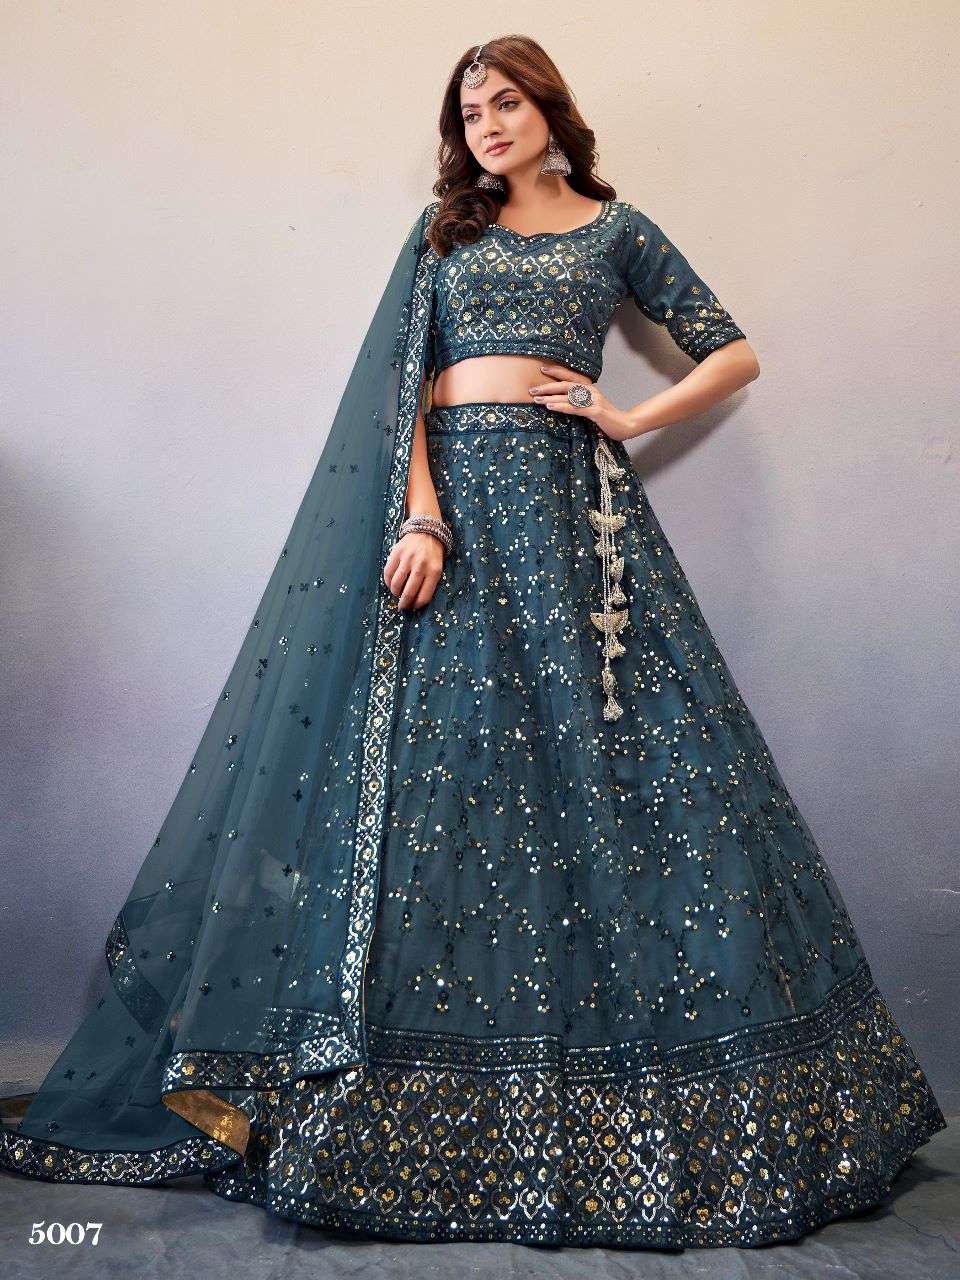 Occations Vol-2 By Anantesh 5003 To 5008 Series Bridal Wear Collection Beautiful Stylish Colorful Fancy Party Wear & Occasional Wear Premium Net Lehengas At Wholesale Price